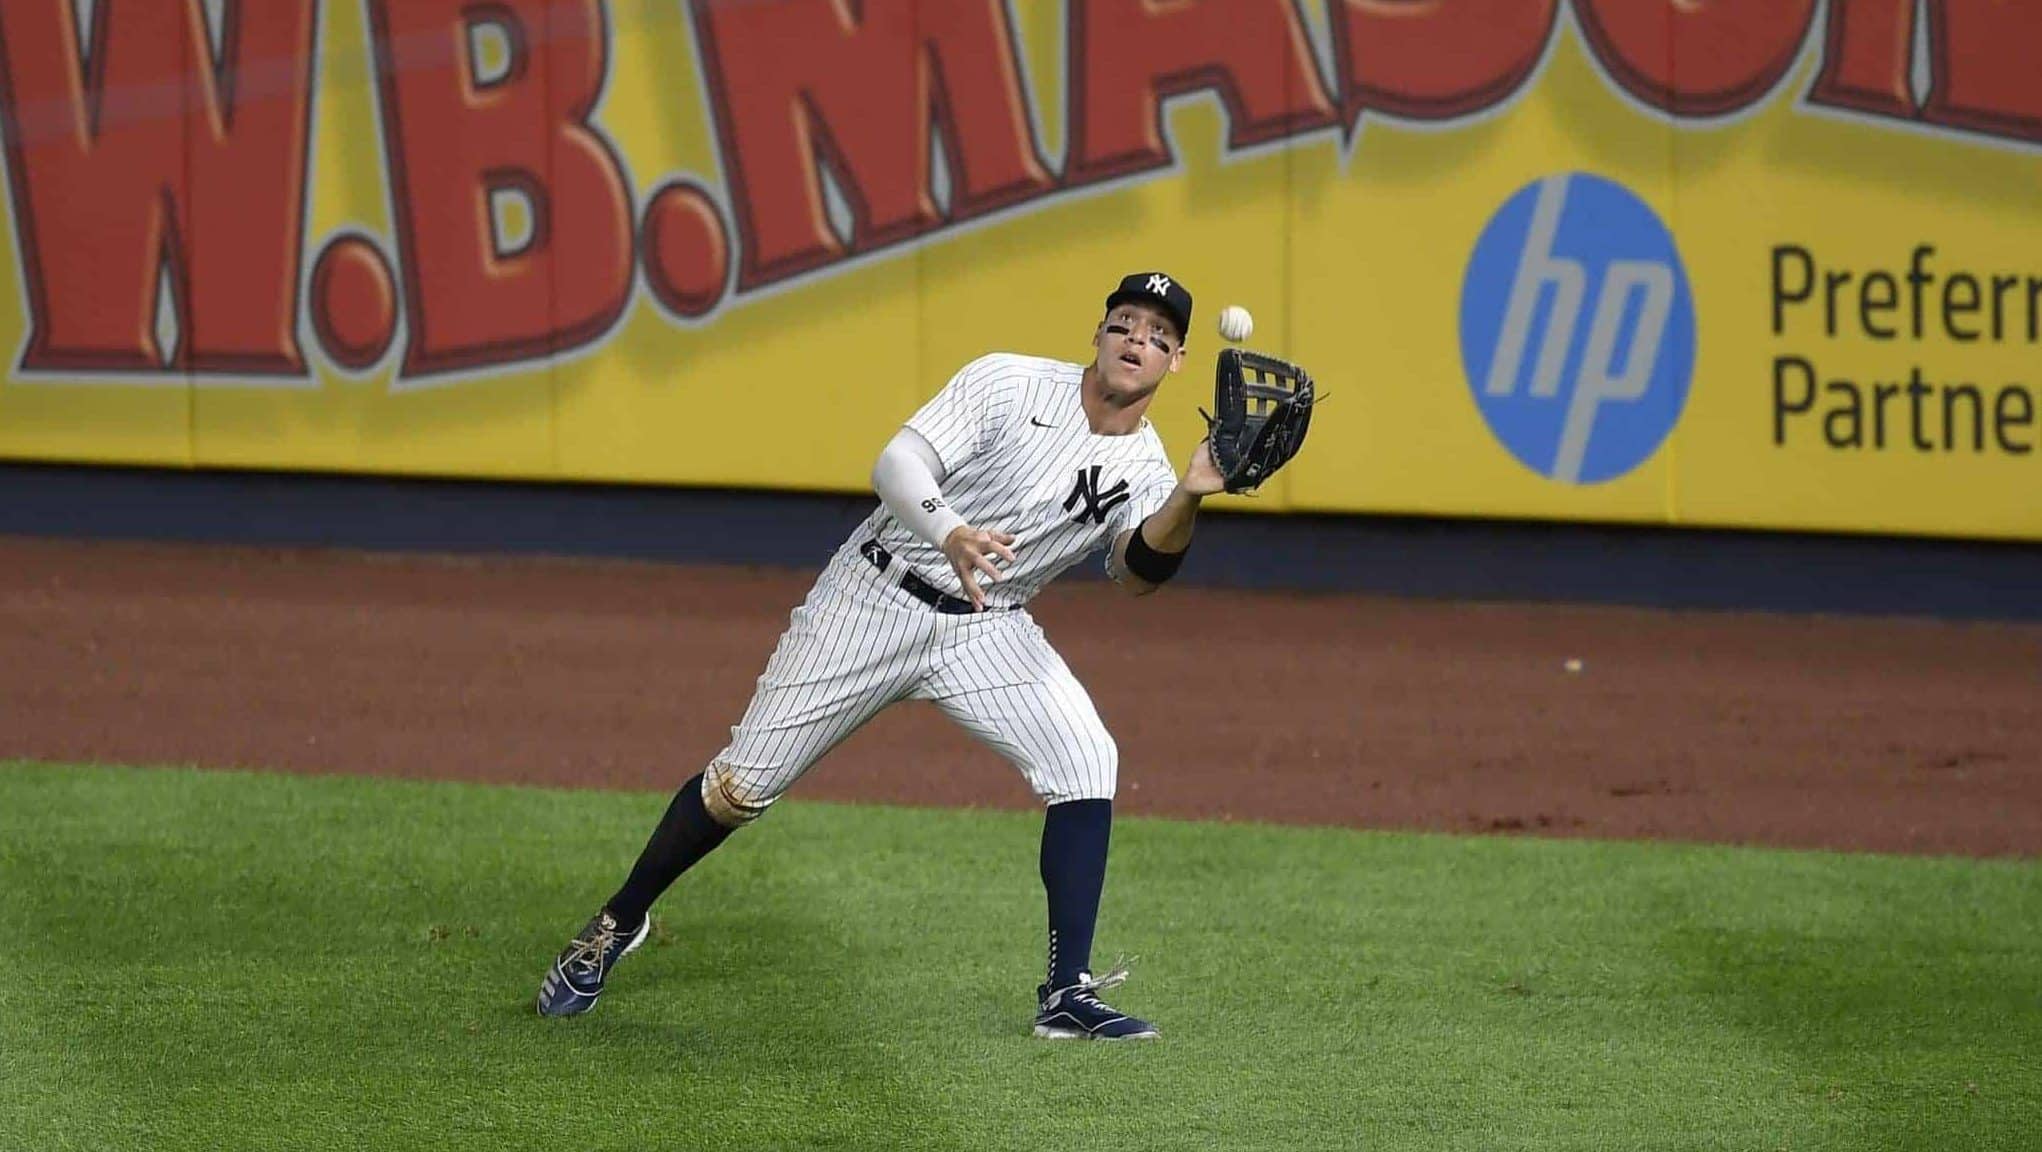 NEW YORK, NEW YORK - AUGUST 03: Aaron Judge #99 of the New York Yankees makes an out on a fly ball in the right field during the fifth inning against the Philadelphia Phillies at Yankee Stadium on August 03, 2020 in the Bronx borough of New York City.